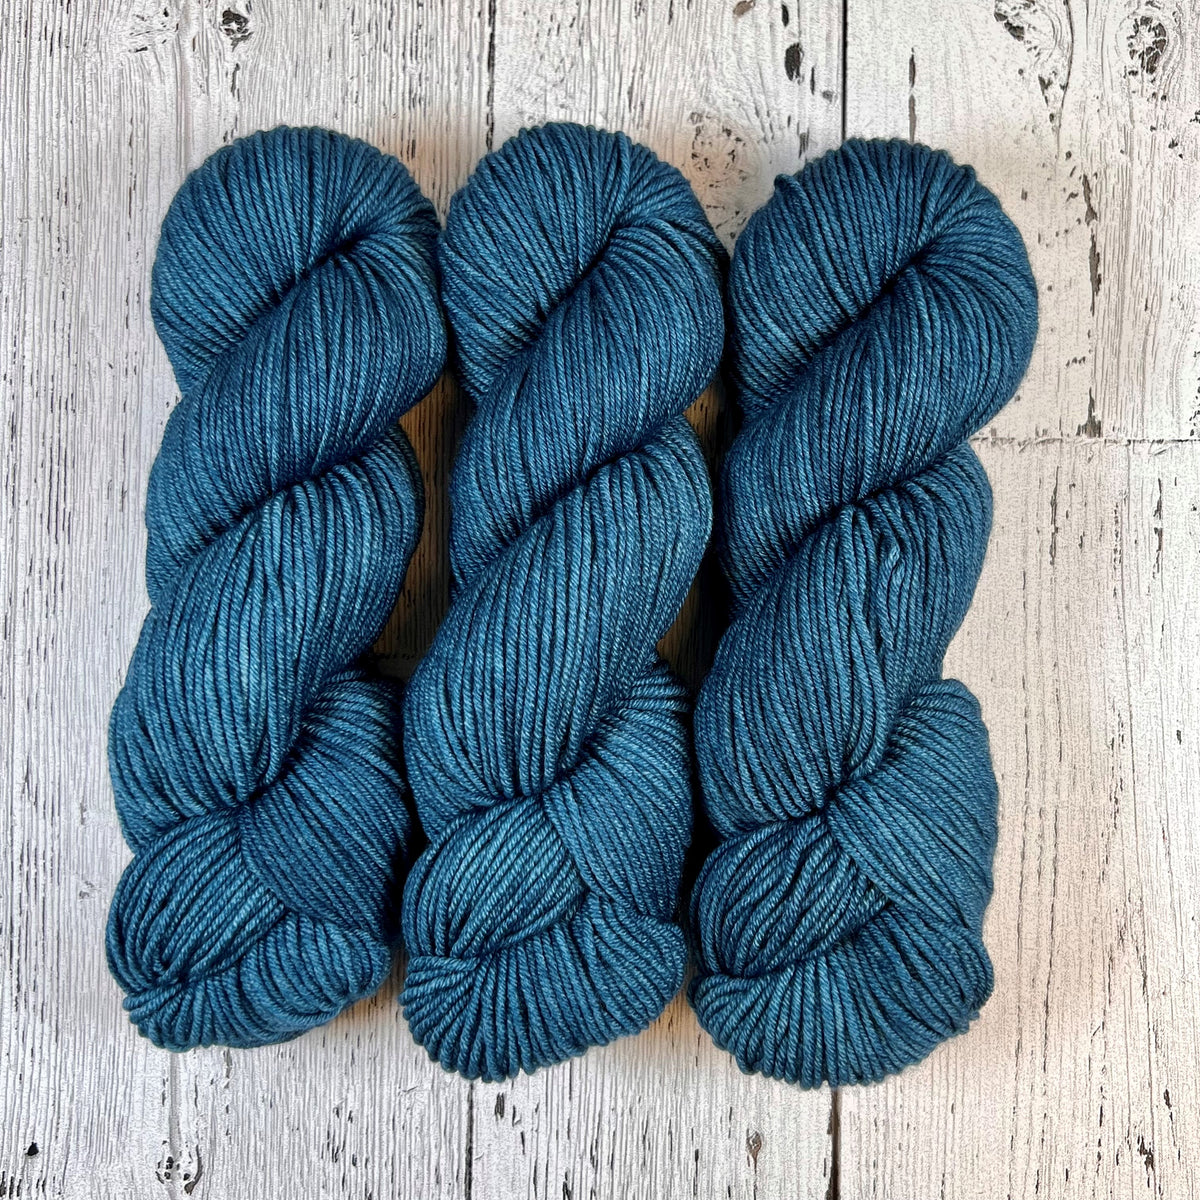 Adire - Fioritura Worsted - Dyed Stock